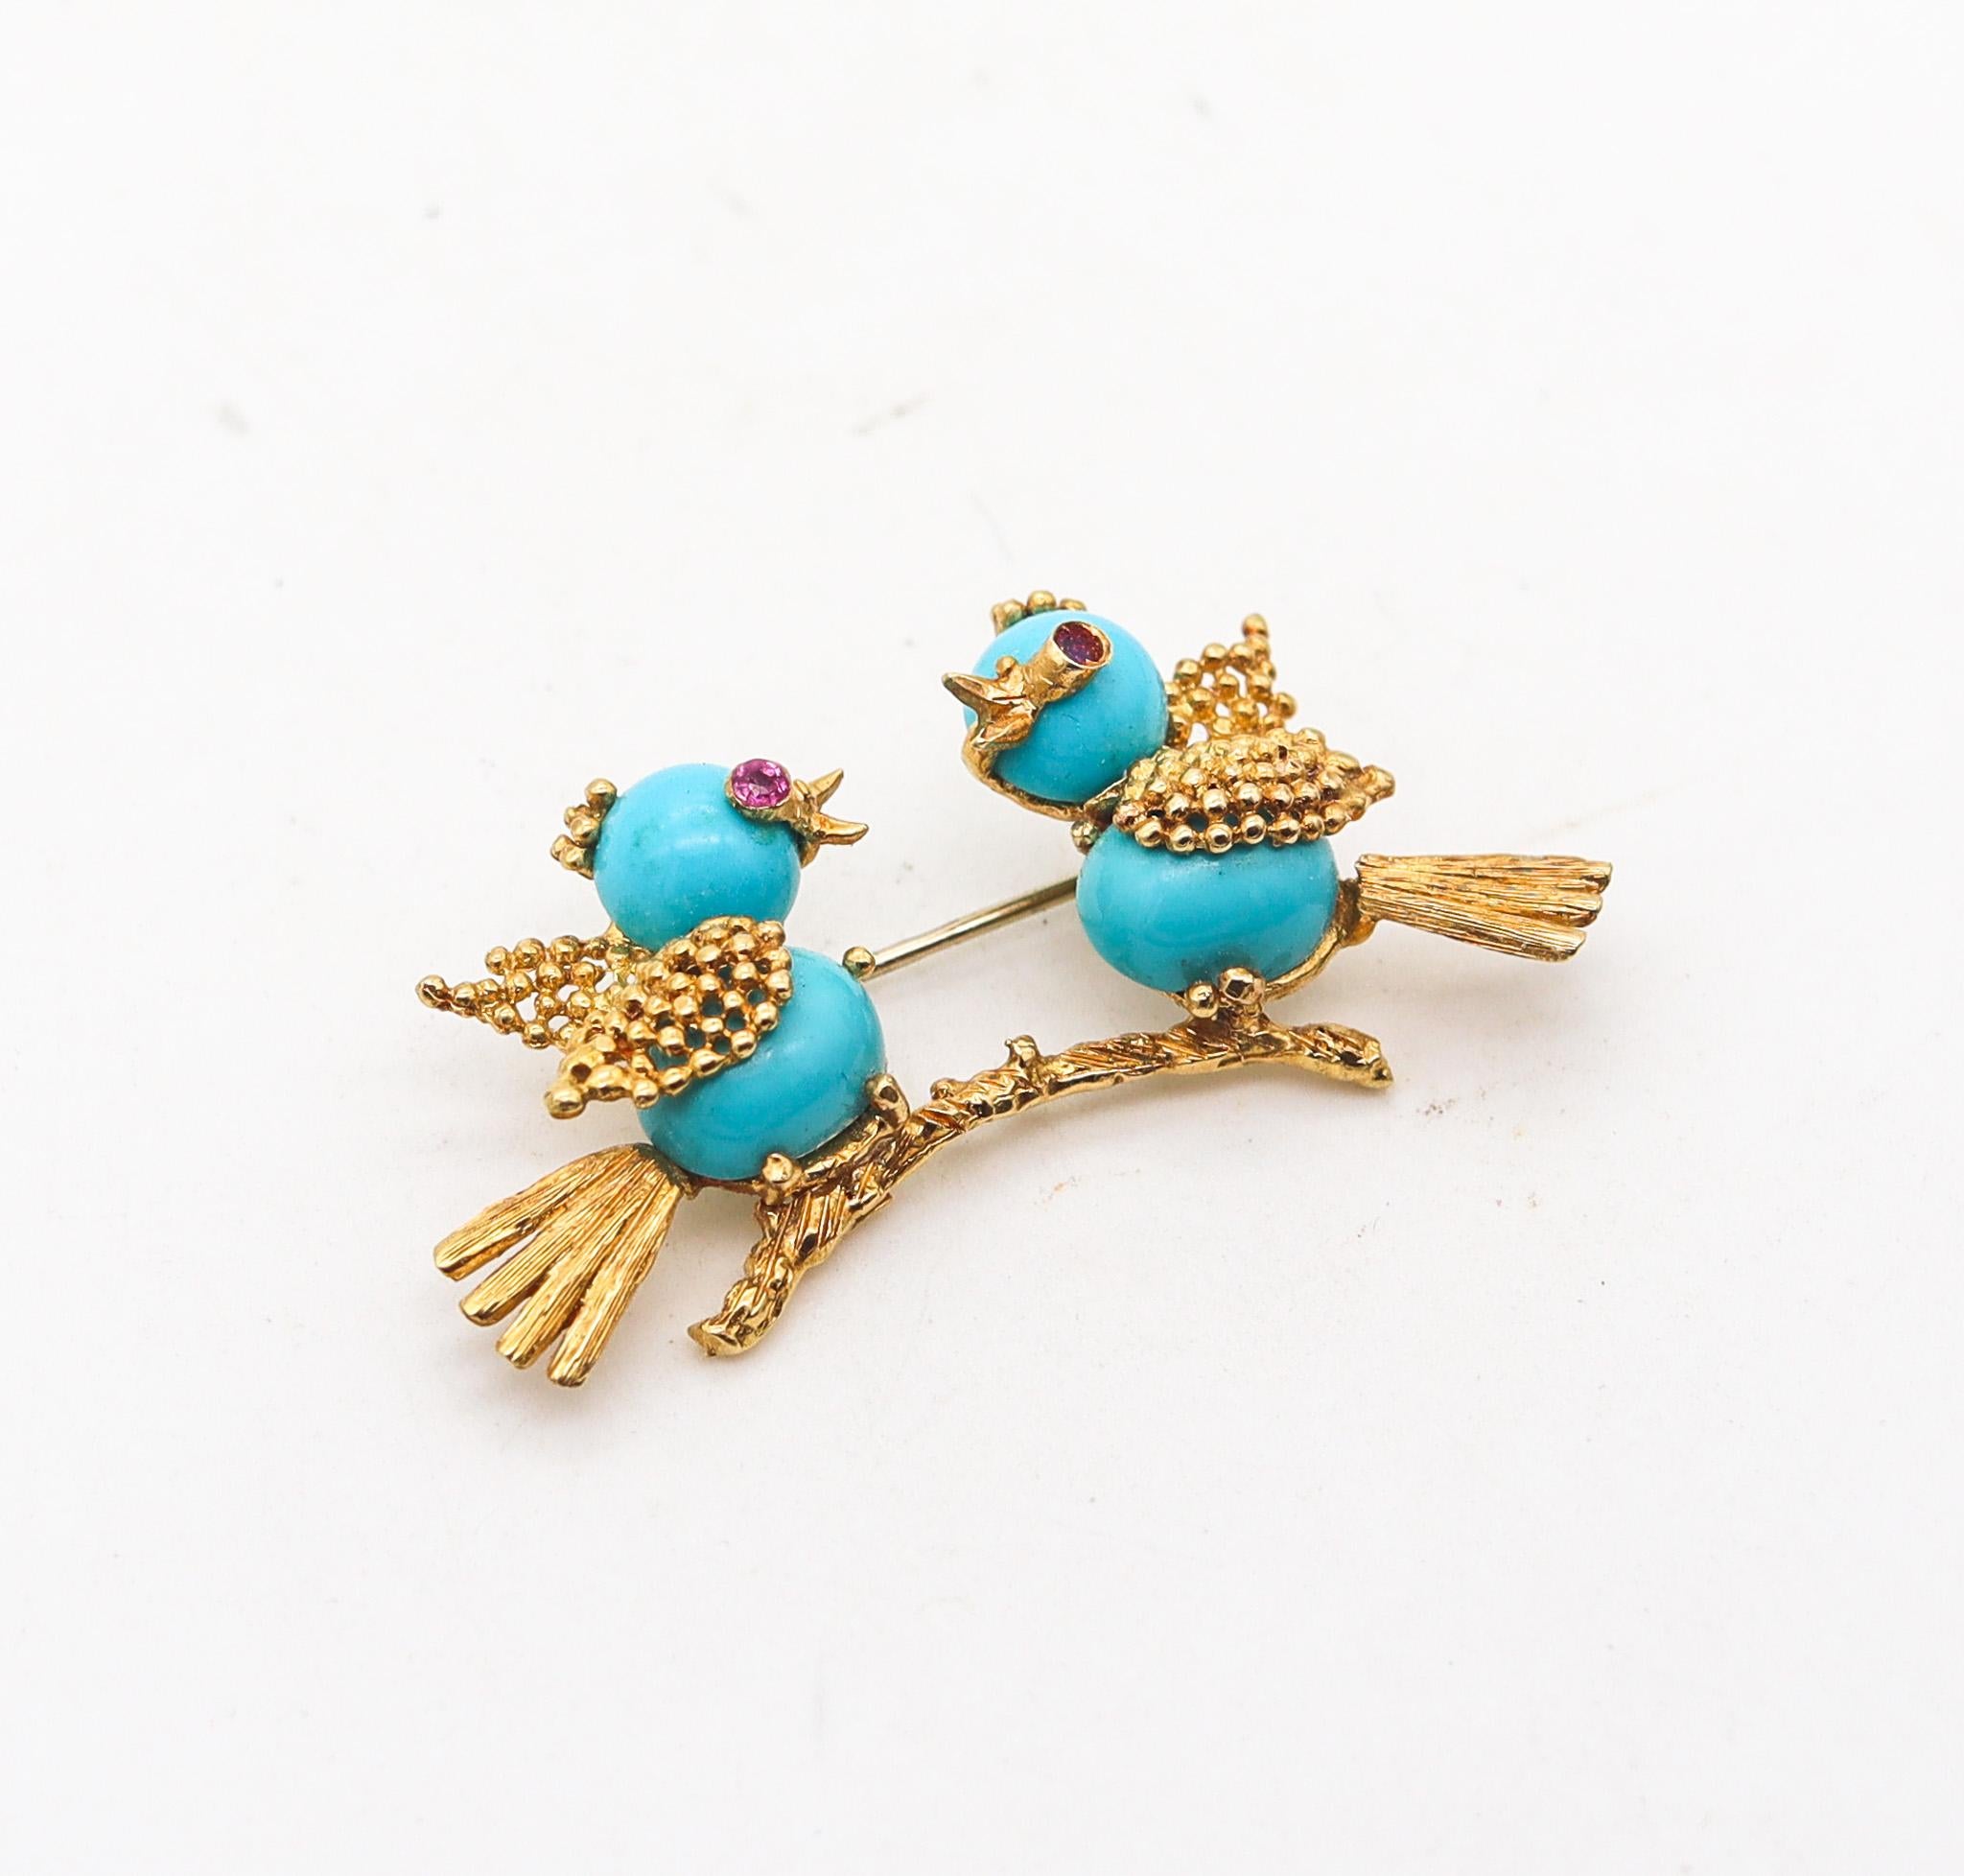 Modernist Italian 1960 Love Birds Brooch In 18Kt Yellow Gold With Turquoises And Rubies